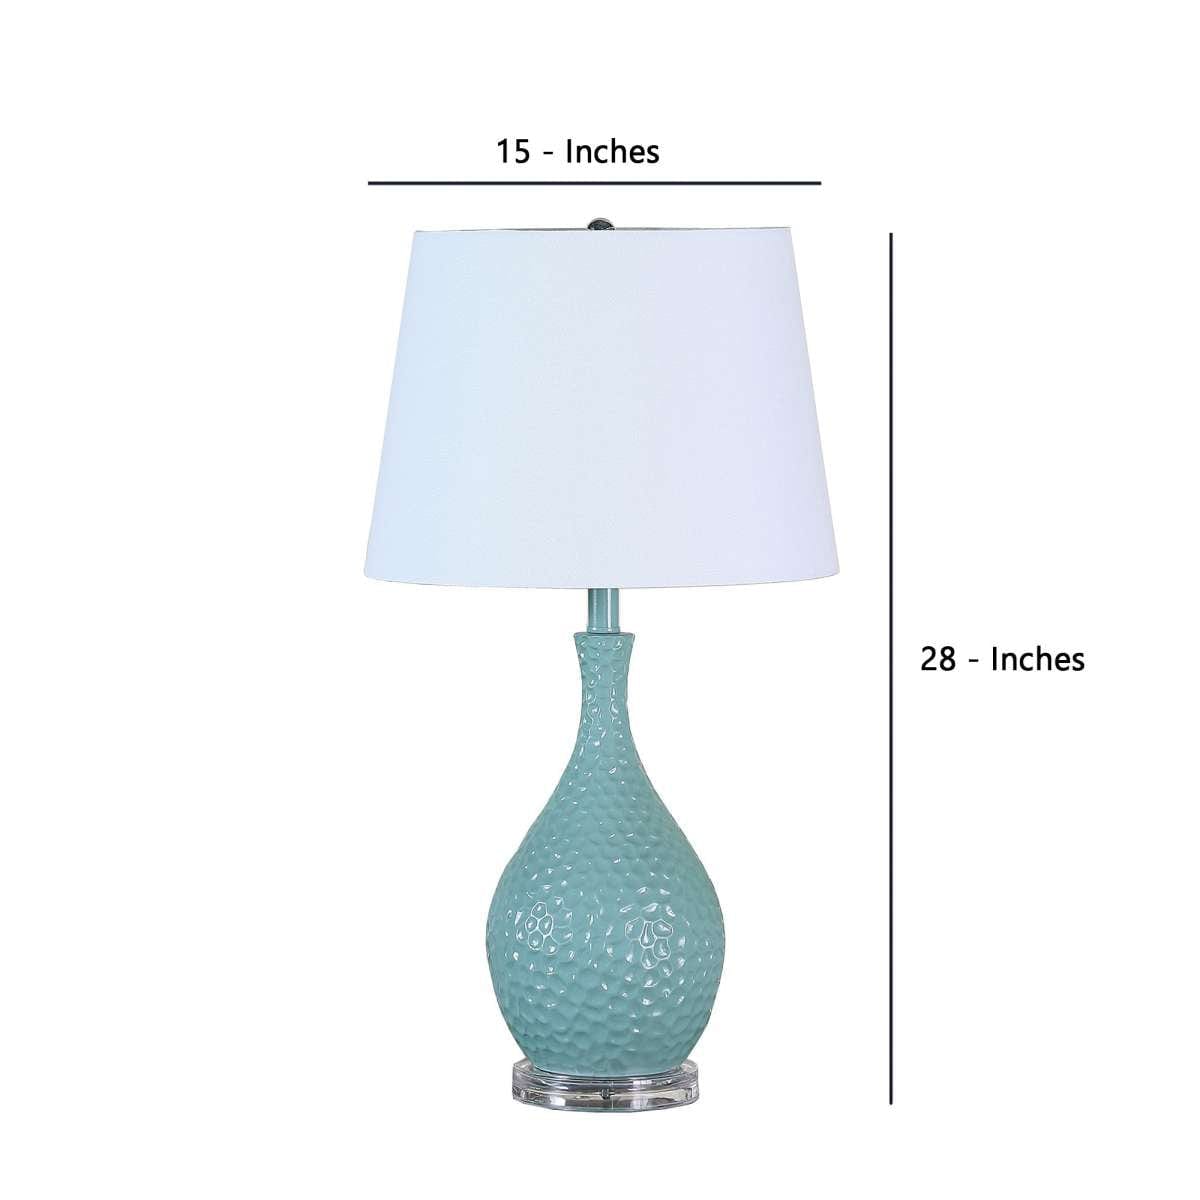 Benzara Pin Bowl Design Metal Table Lamp With Hammered Pattern, Blue By Benzara Table Lamps BM233921